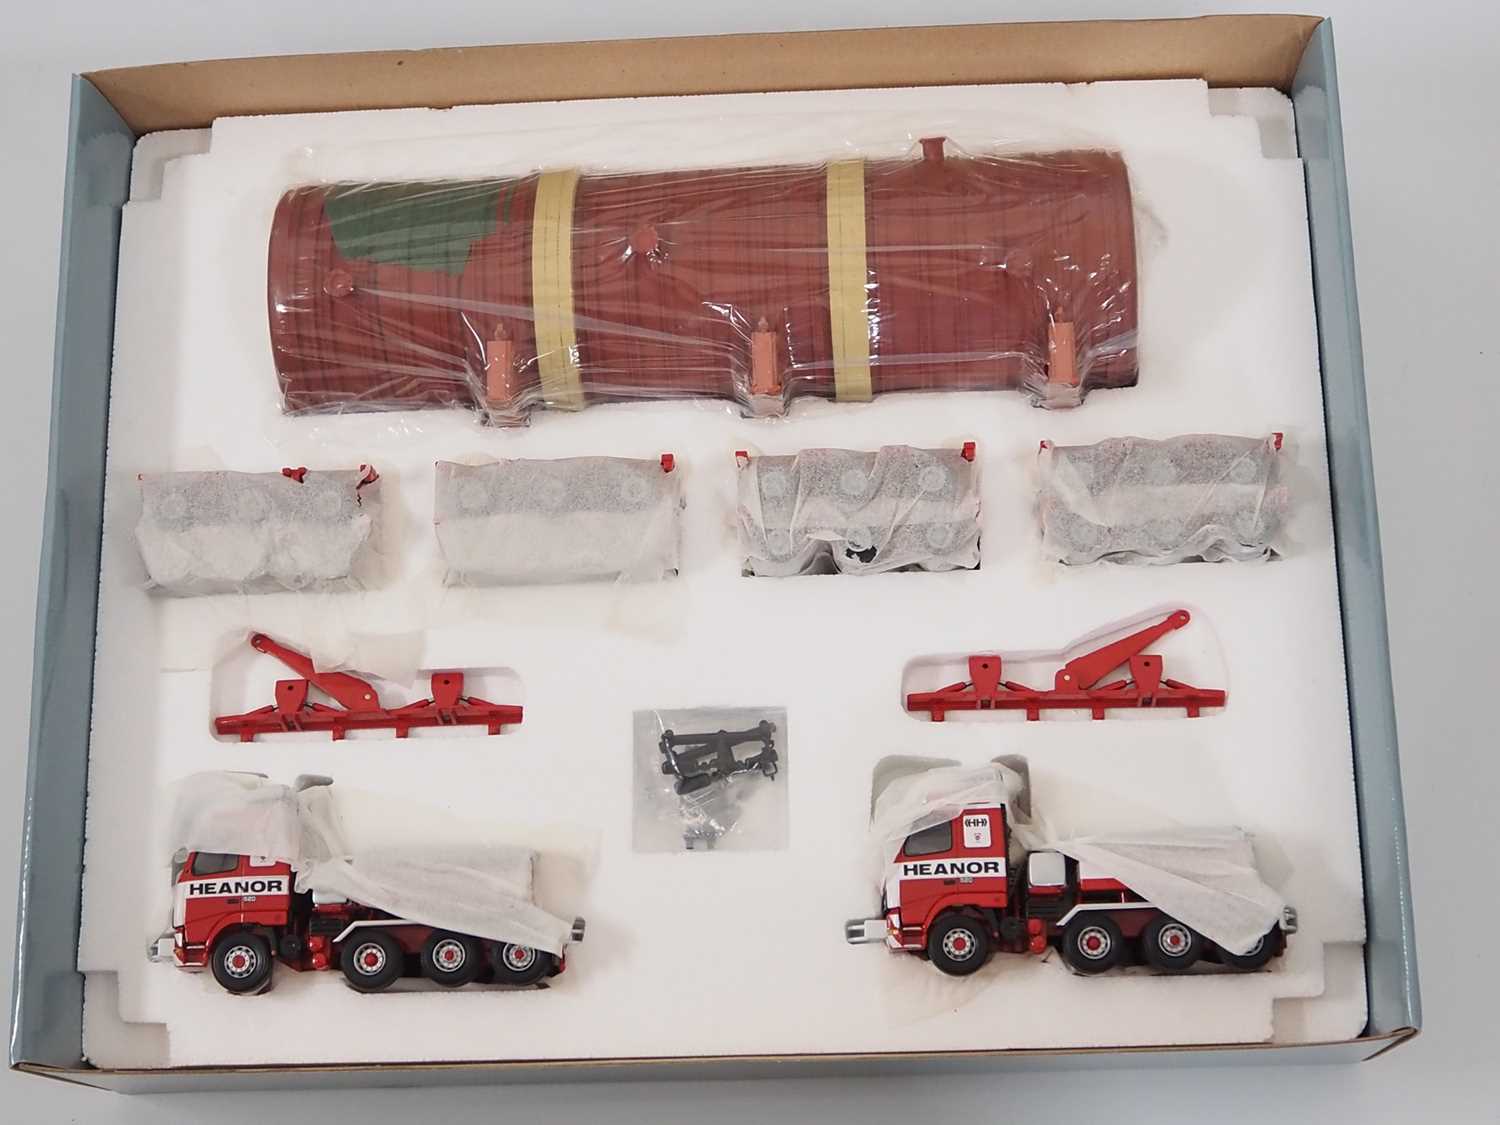 A CORGI 1:50 scale CC12403 Heavy Haulage set in Heanor livery - appears unused - VG/E in VG box - Image 3 of 5